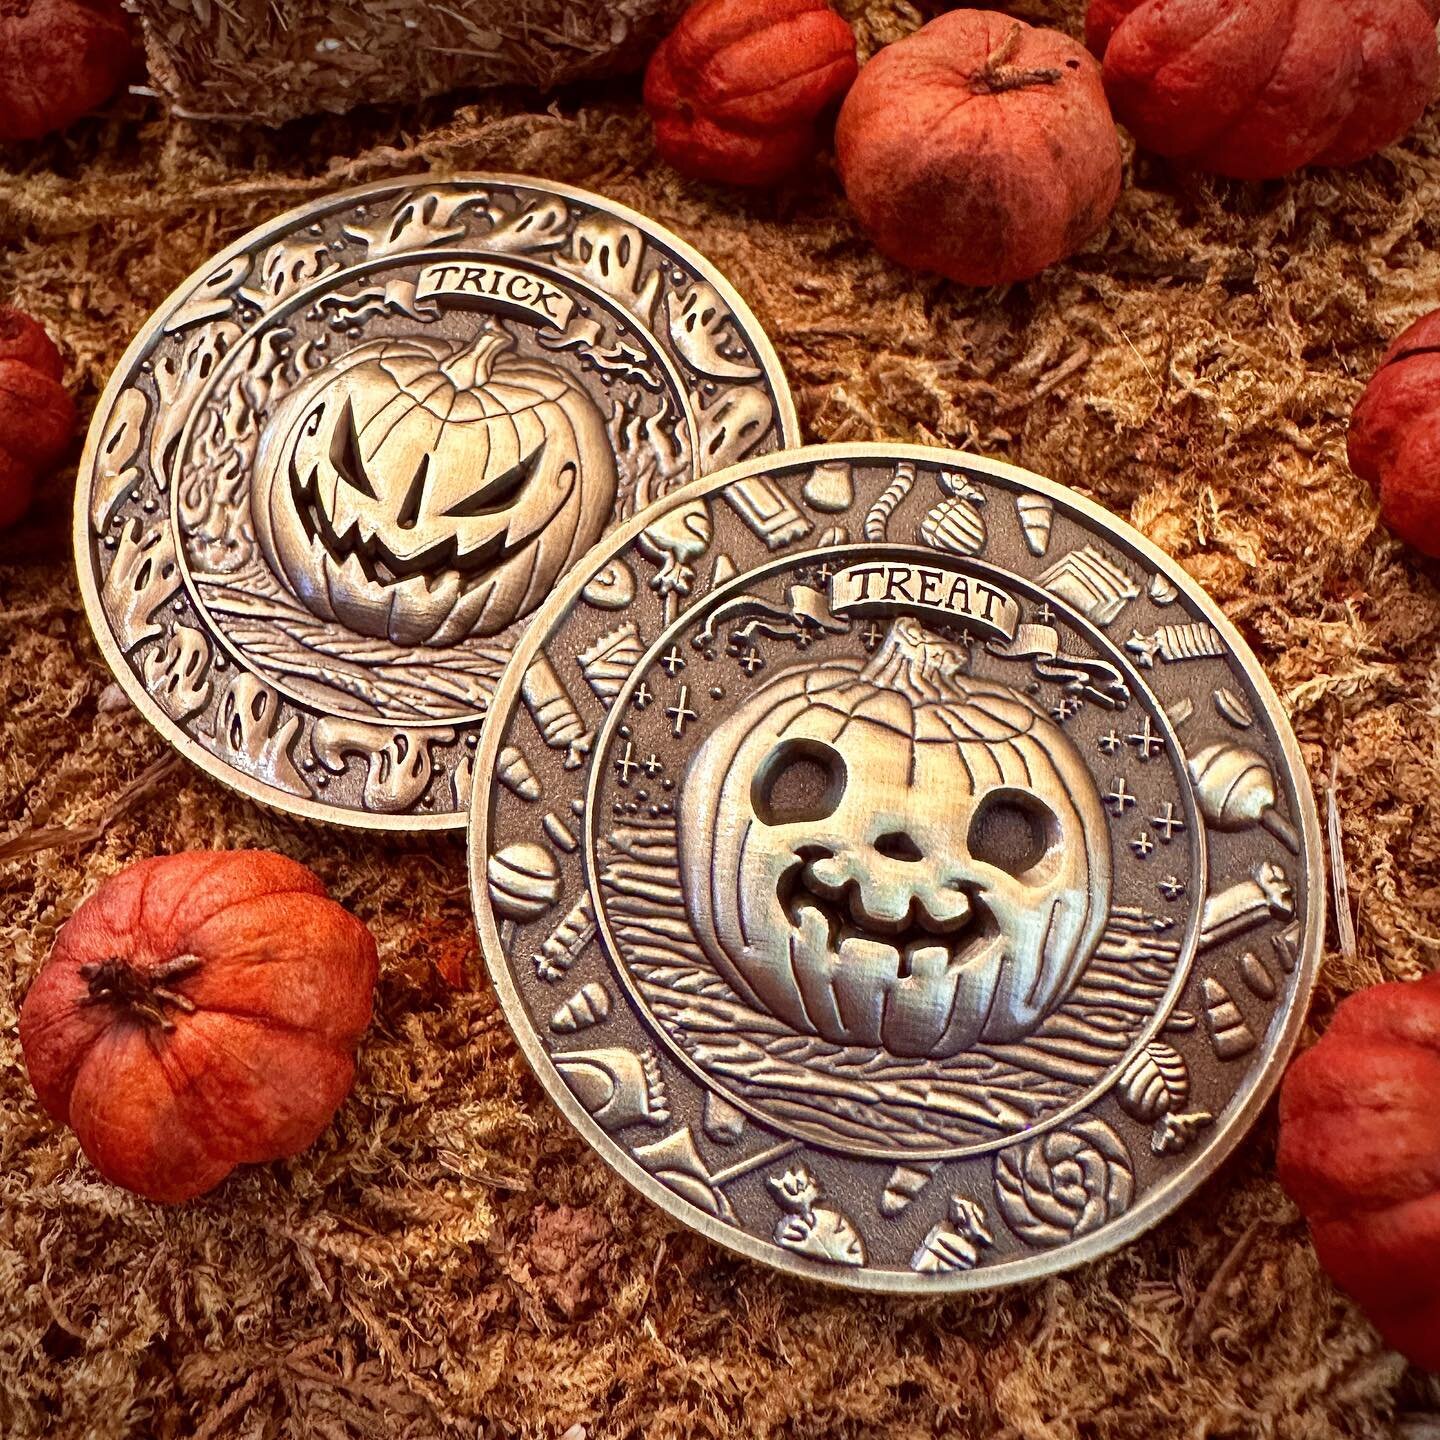 🎃 &quot;Trick or Treat&quot; Coins 🎃
After creating my Sun/Moon coins earlier this year, I had the itch to make more! And this one is my first 3-dimensional, double sided coin! If you want to own one of these, sign up for my Patreon by November 1st